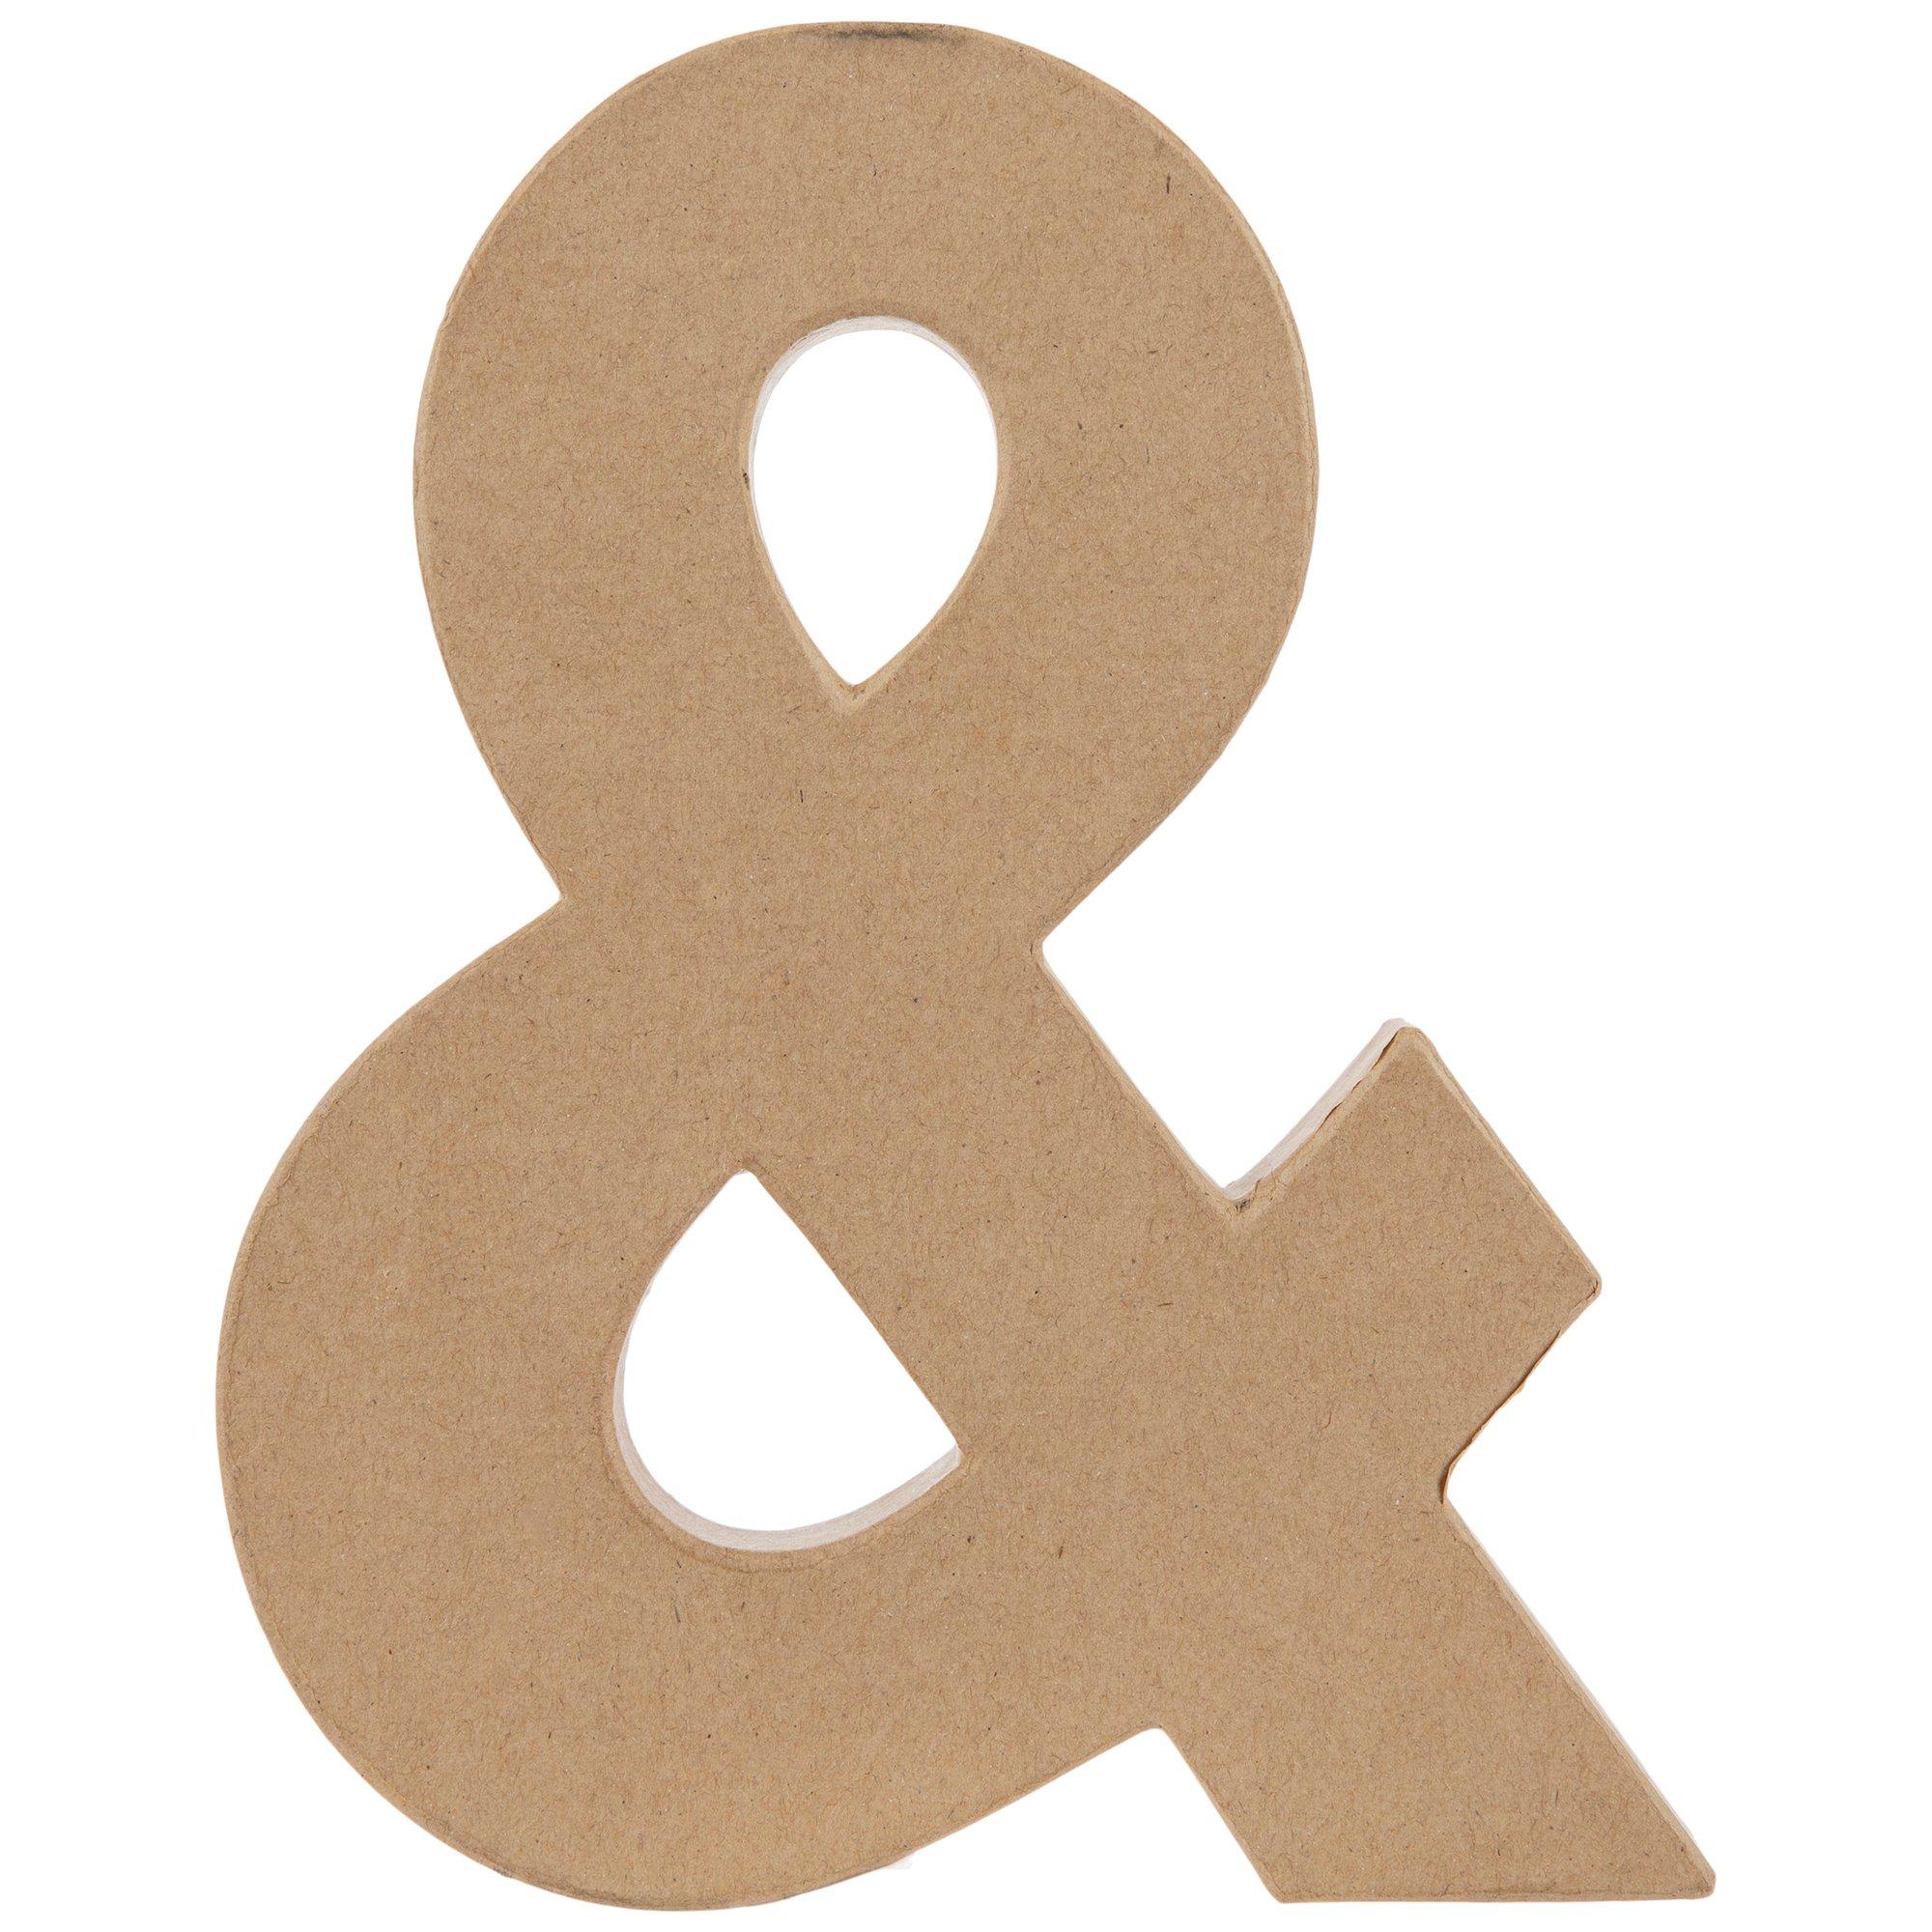 Paper Mache Letters 8 High A-Z Plus & These Cardboard Letters Are